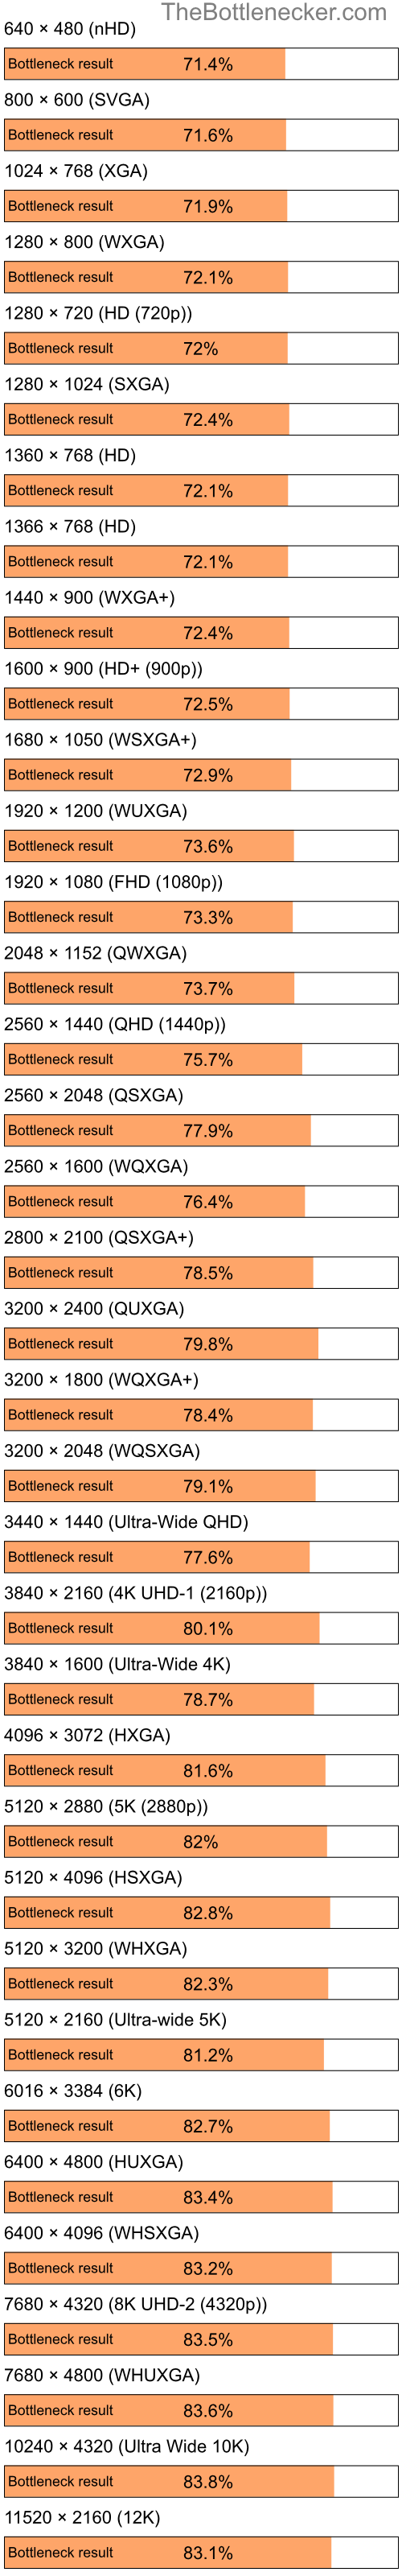 Bottleneck results by resolution for Intel Pentium 4 and NVIDIA GeForce Go 6600 in Graphic Card Intense Tasks